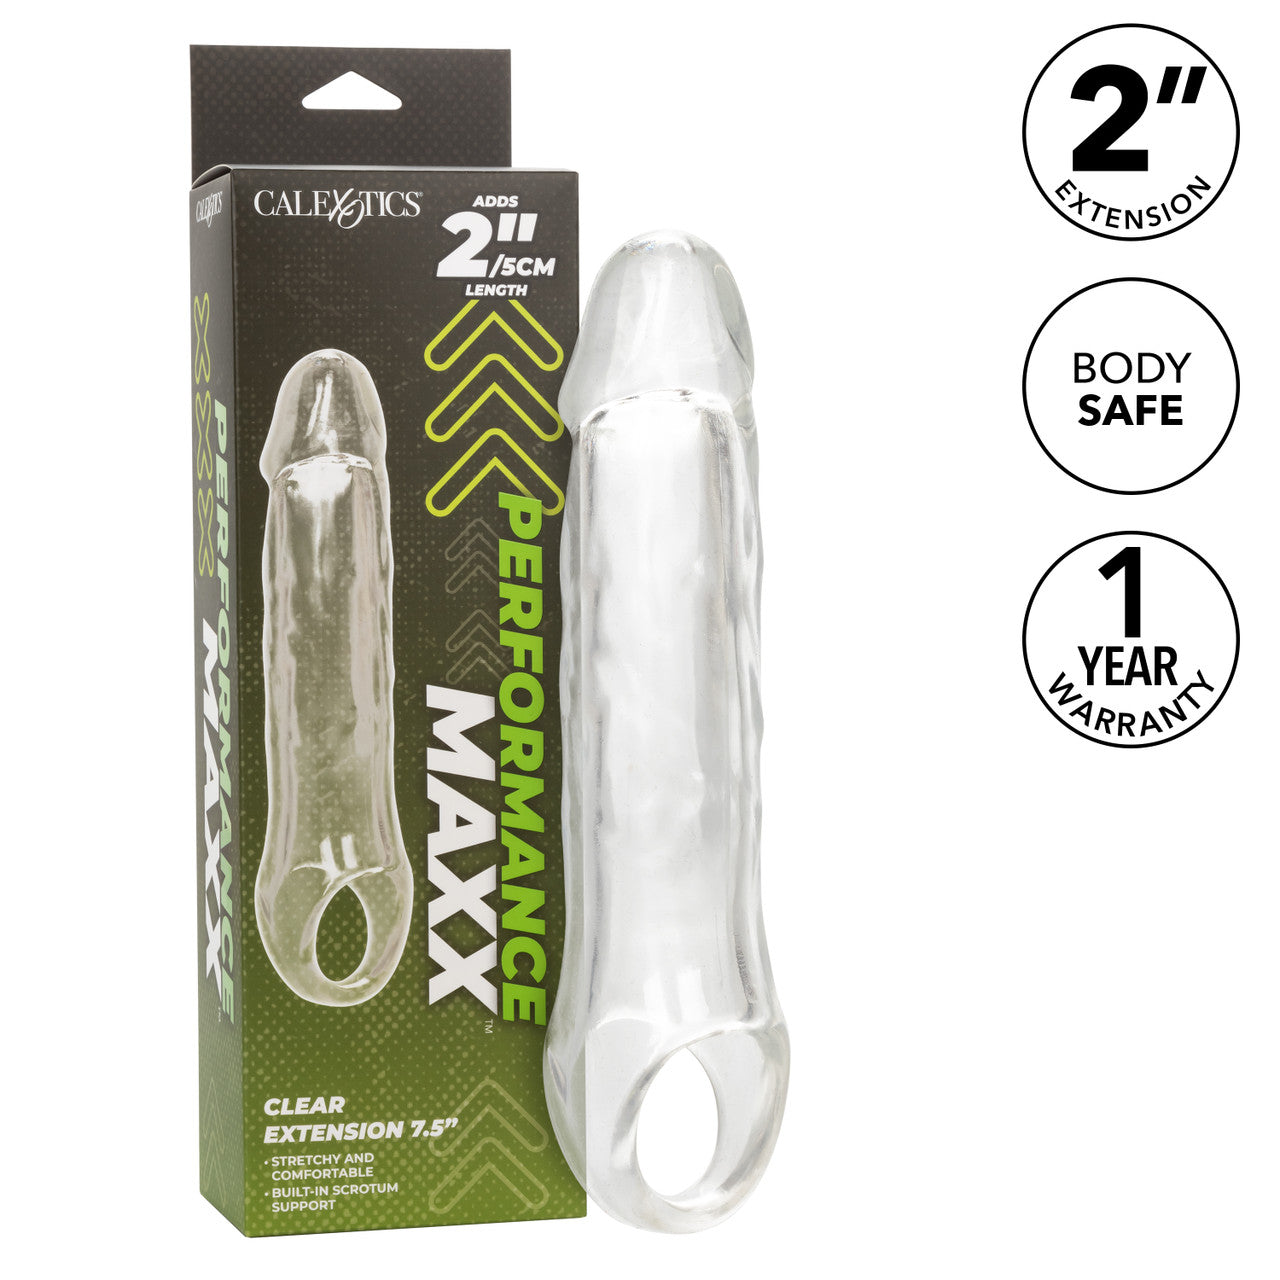 Performance Maxx Clear Extension 7.5"